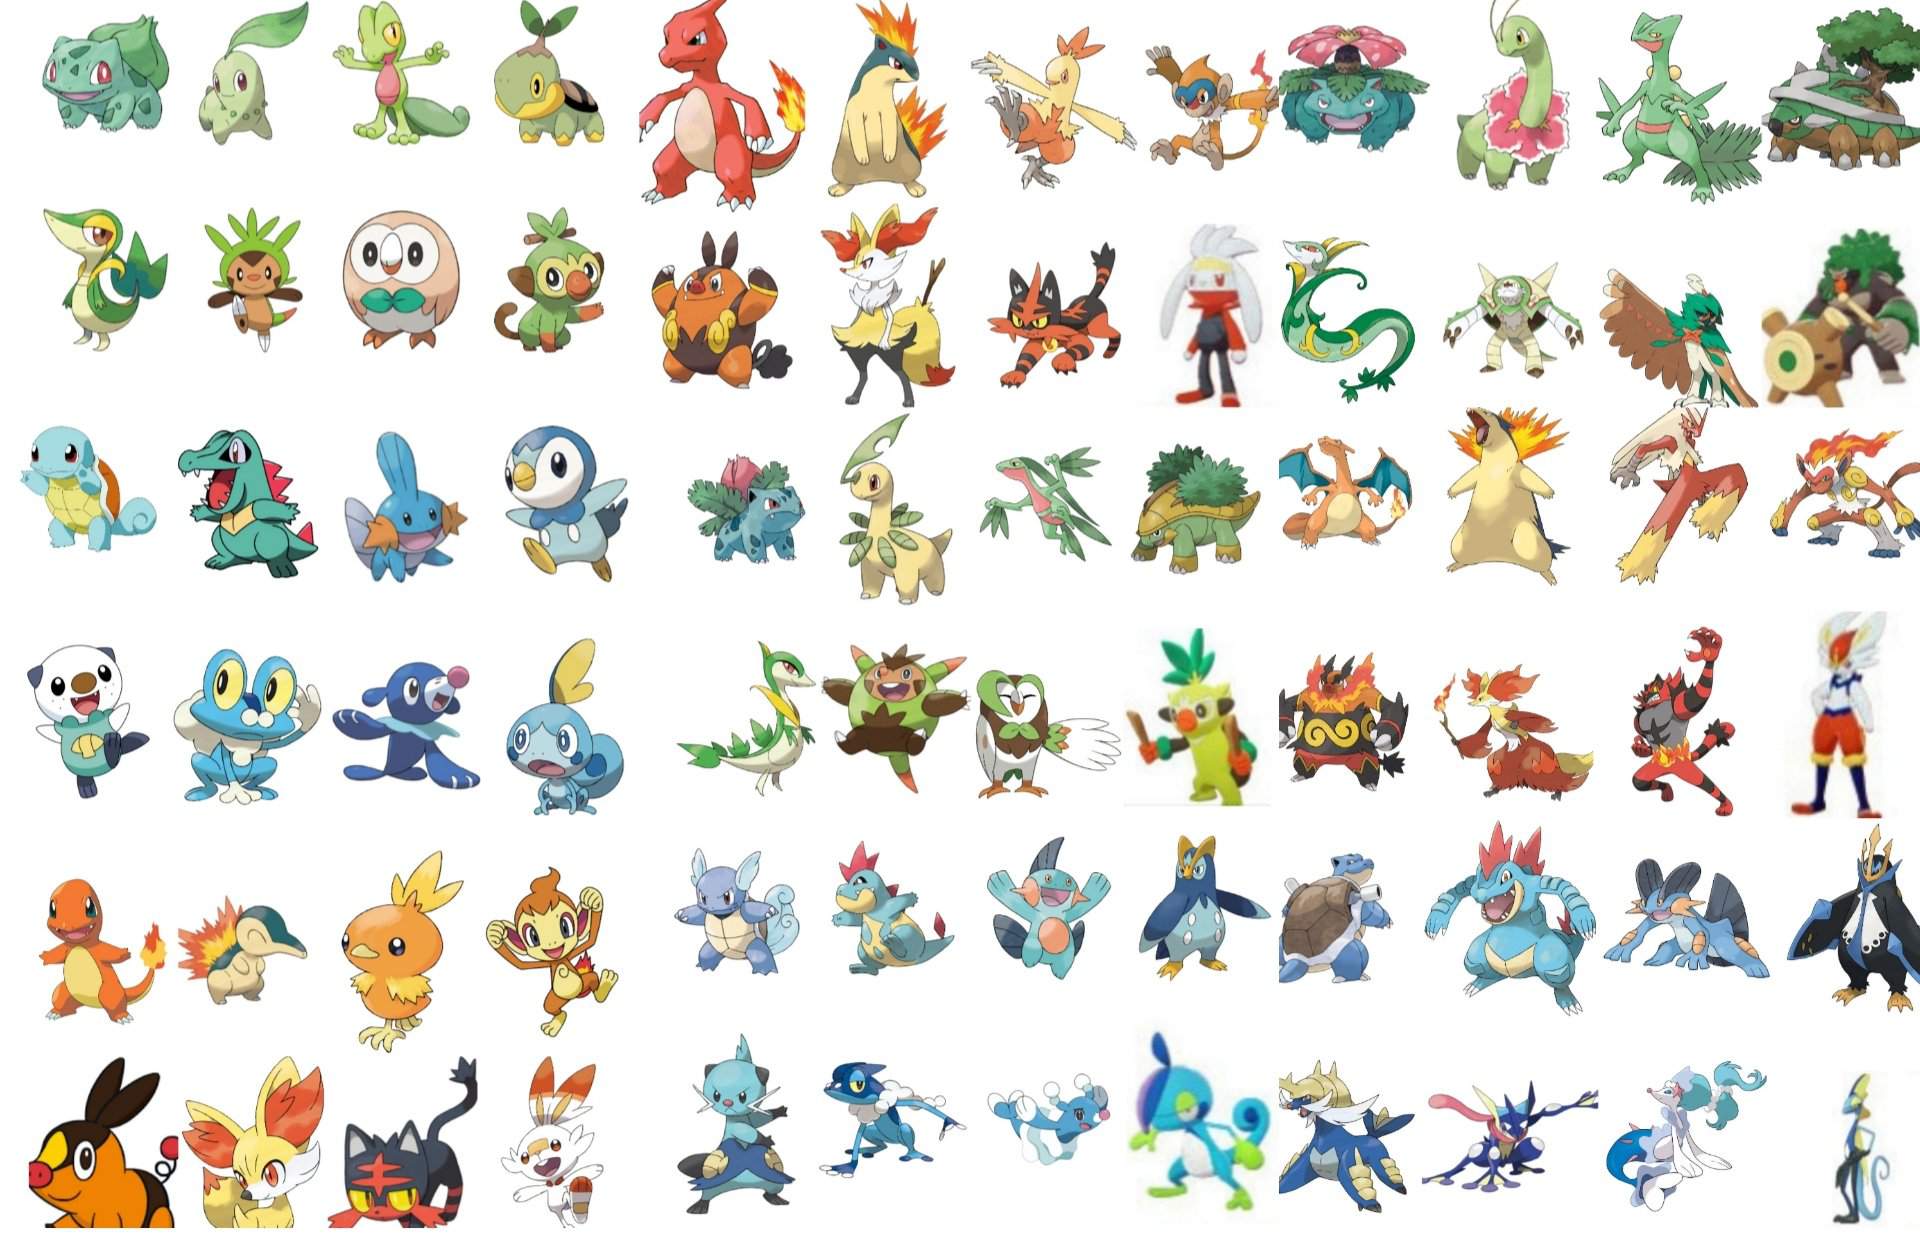 sooo i created this collage of all the starter pokémon and there